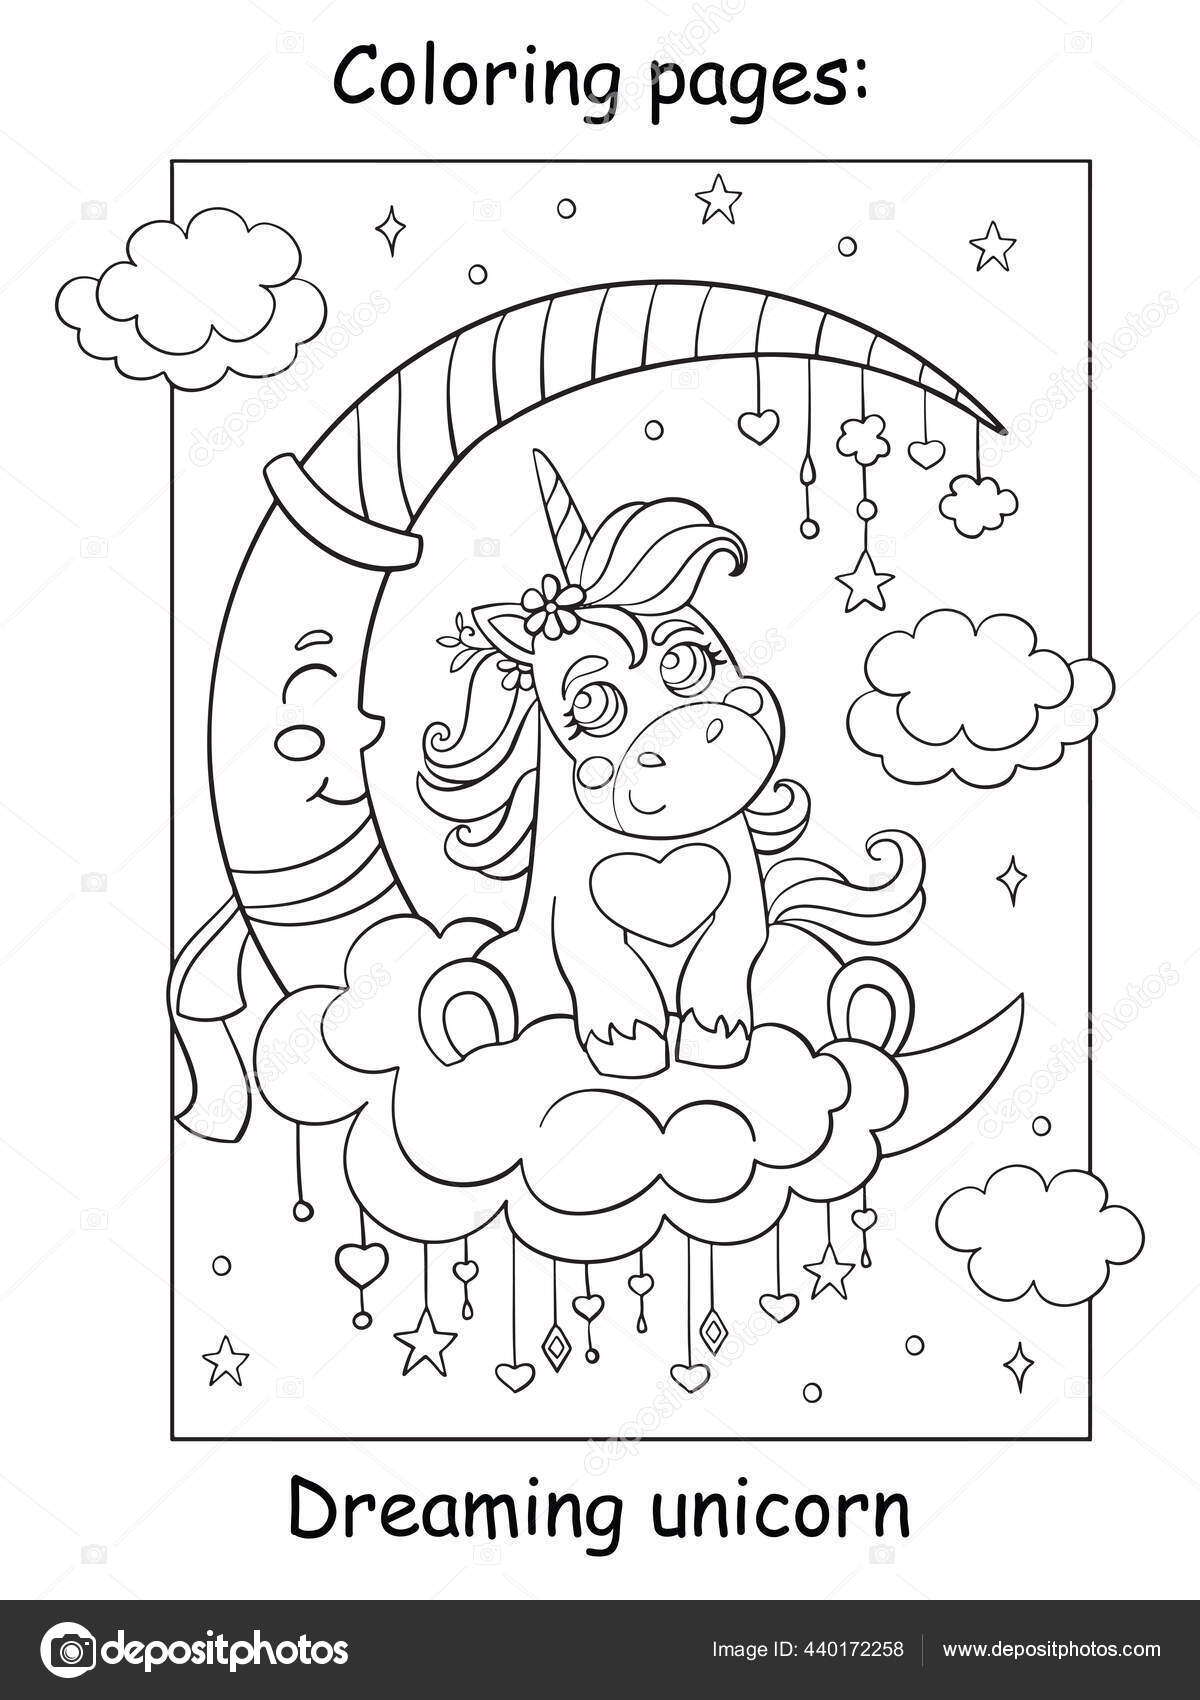 moon game coloring pages